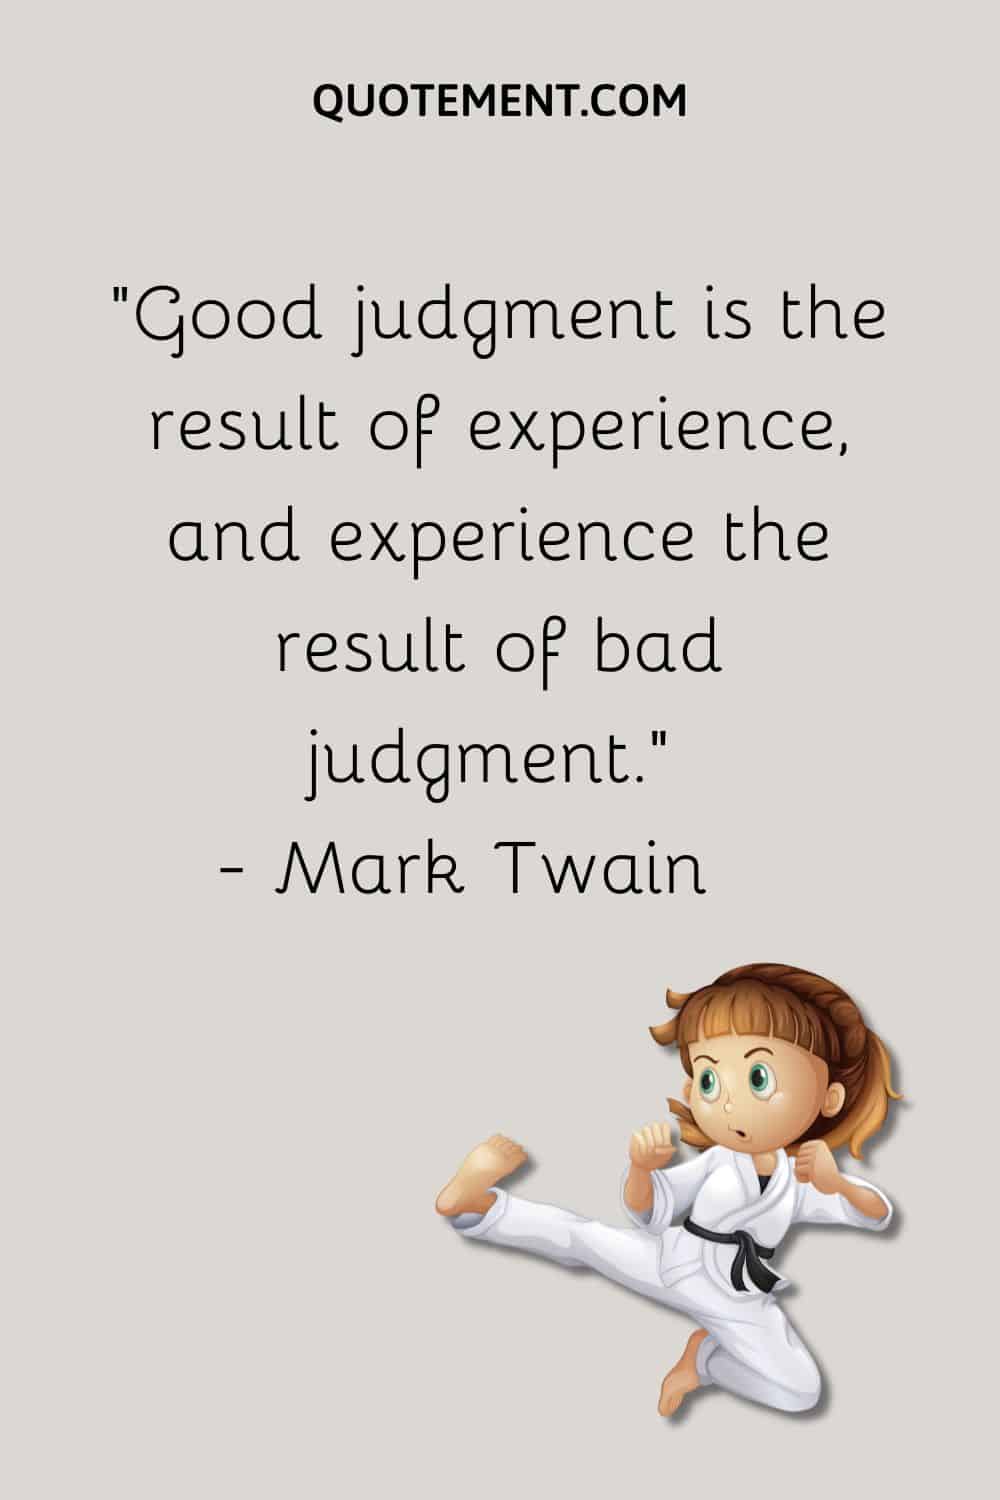 Good judgment is the result of experience, and experience the result of bad judgment.